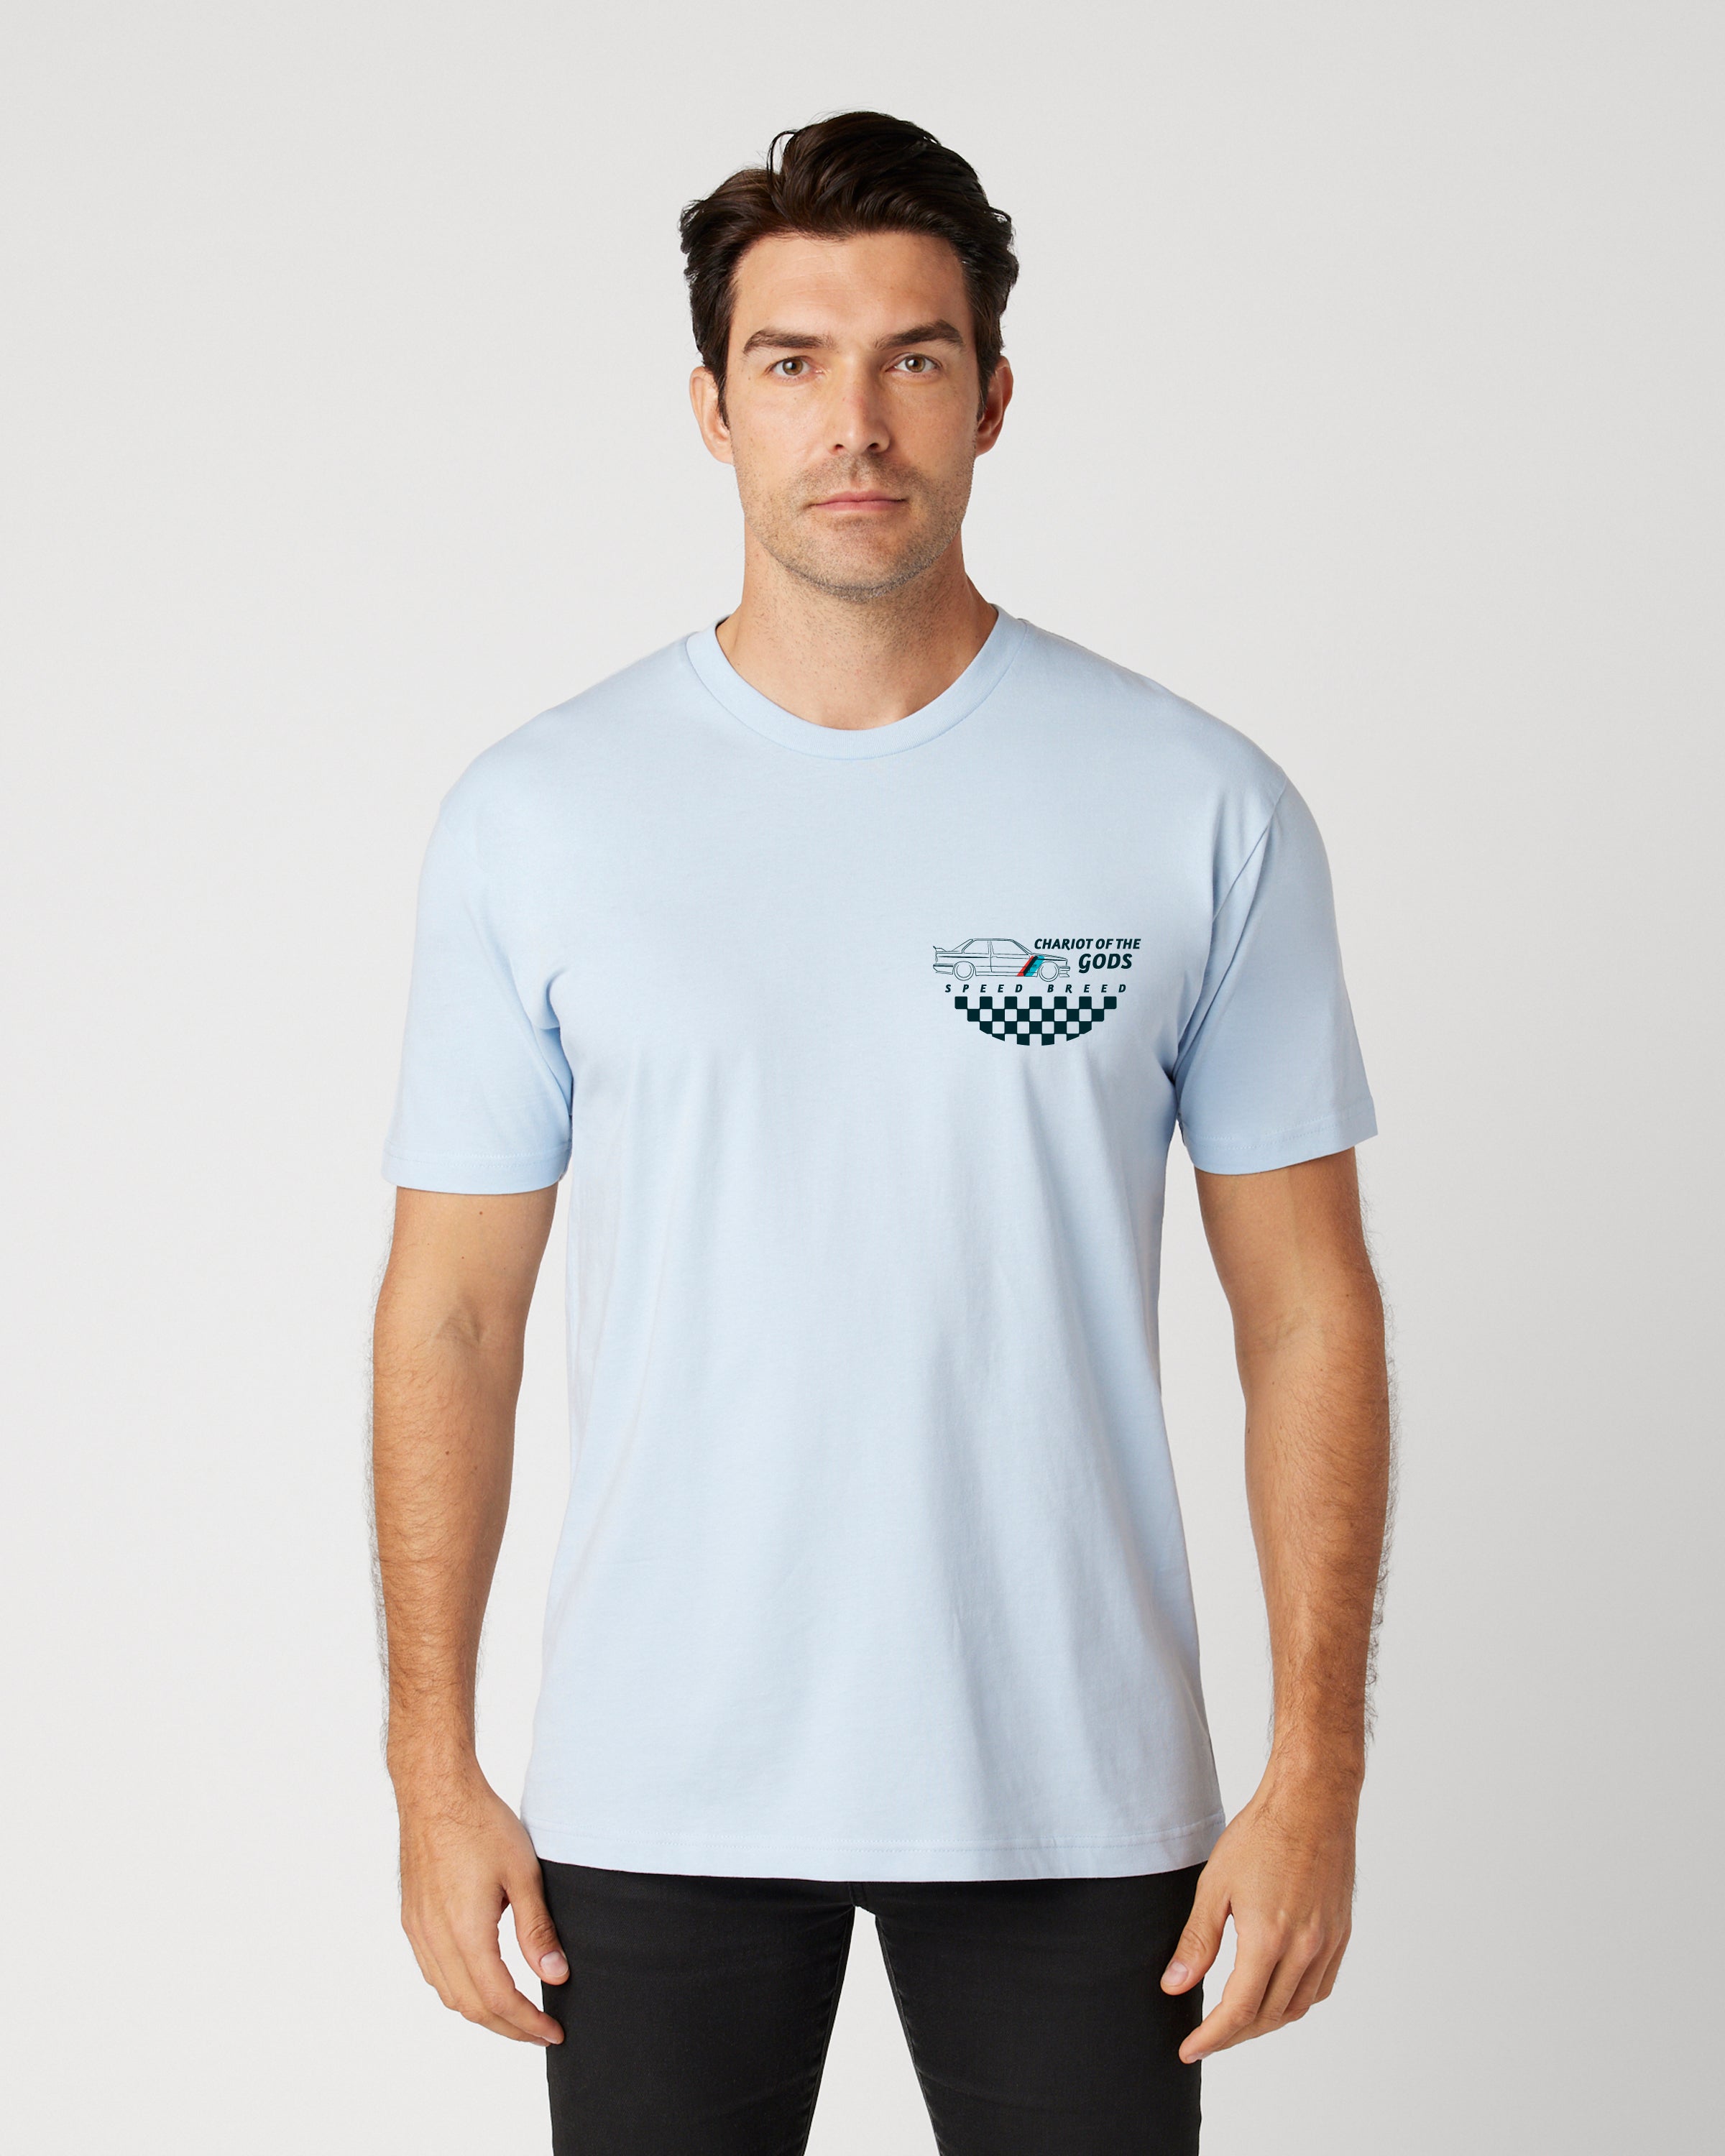 CHARIOT OF THE GODS TEE (Light Blue)